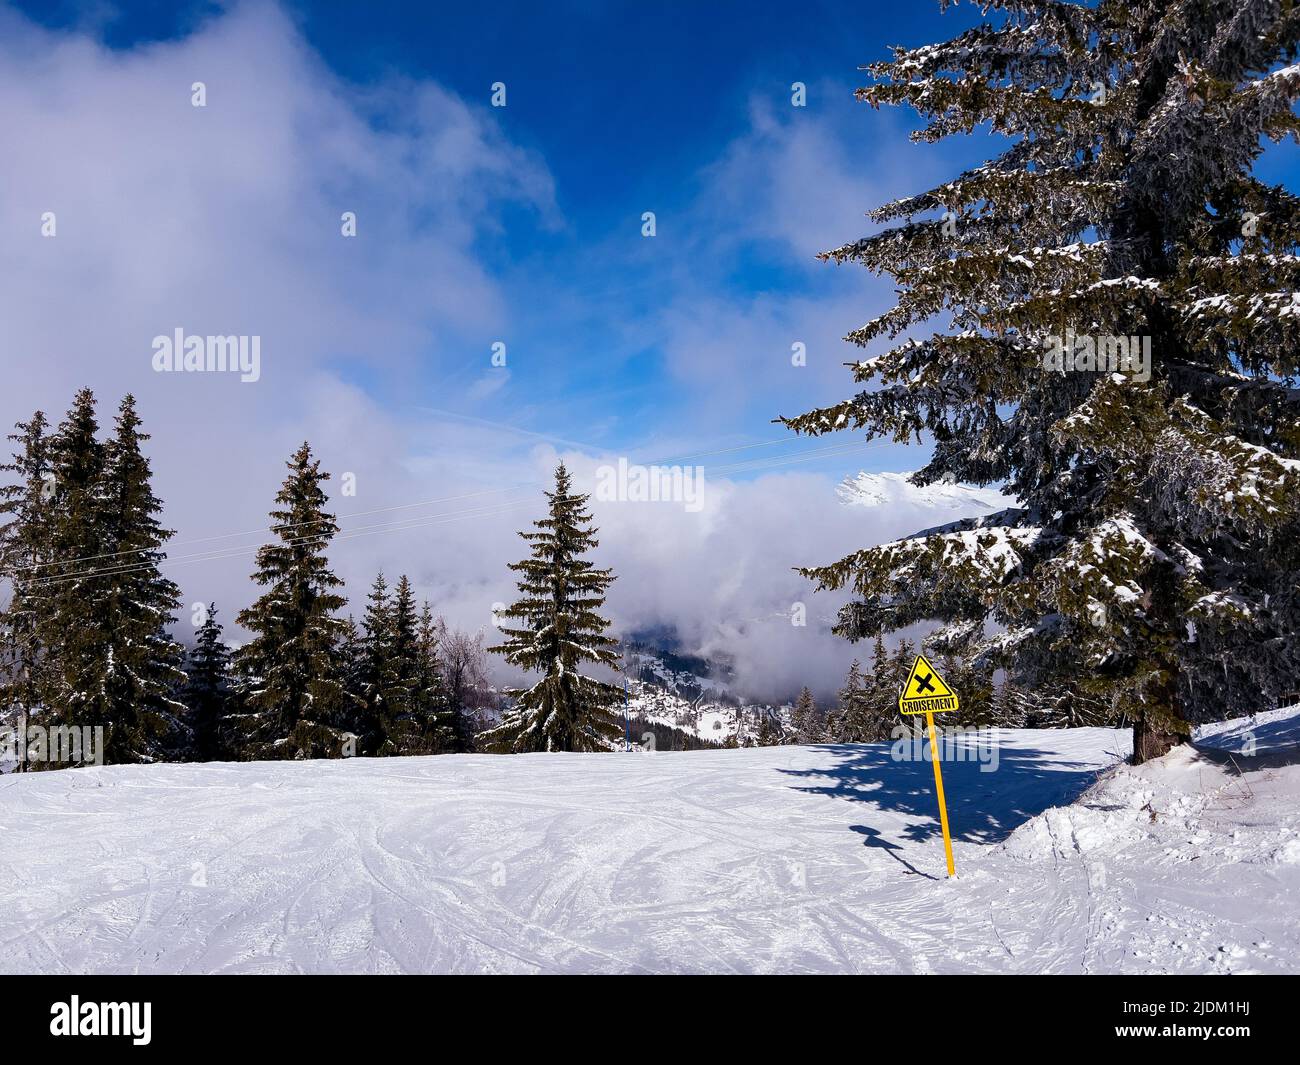 Ski track with crossing yellow sign over high altitude clouds Stock Photo